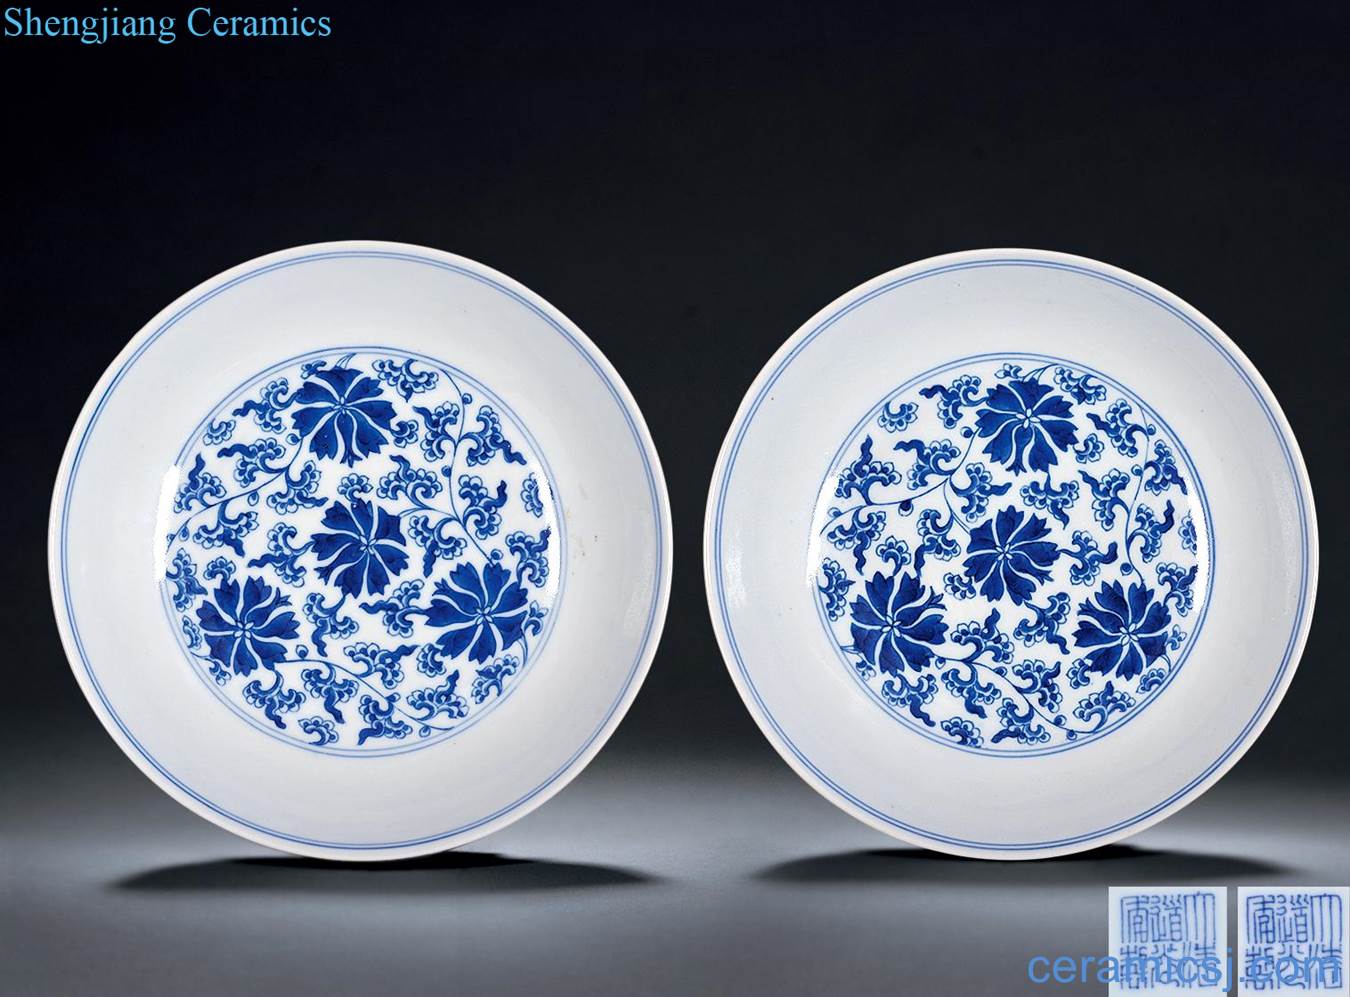 Qing daoguang Blue and white tie up lotus flower plate (a)